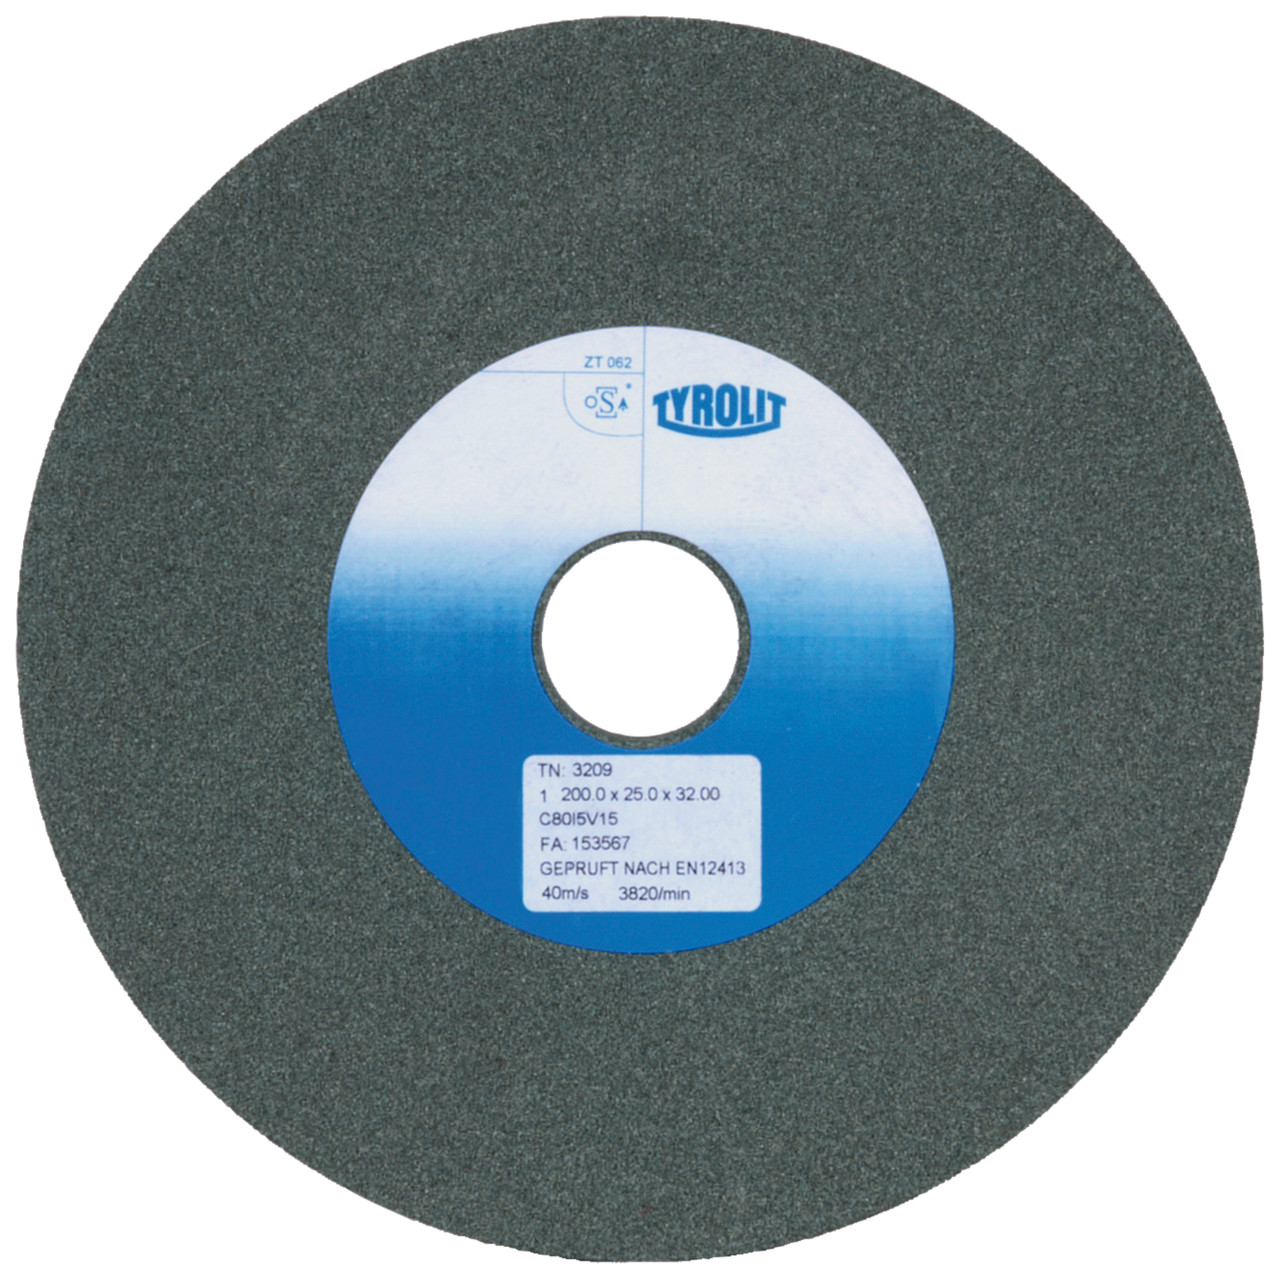 TYROLIT conventional ceramic grinding wheels DxDxH 150x20x20 For carbide and cast iron, shape: 1, Art. 2658